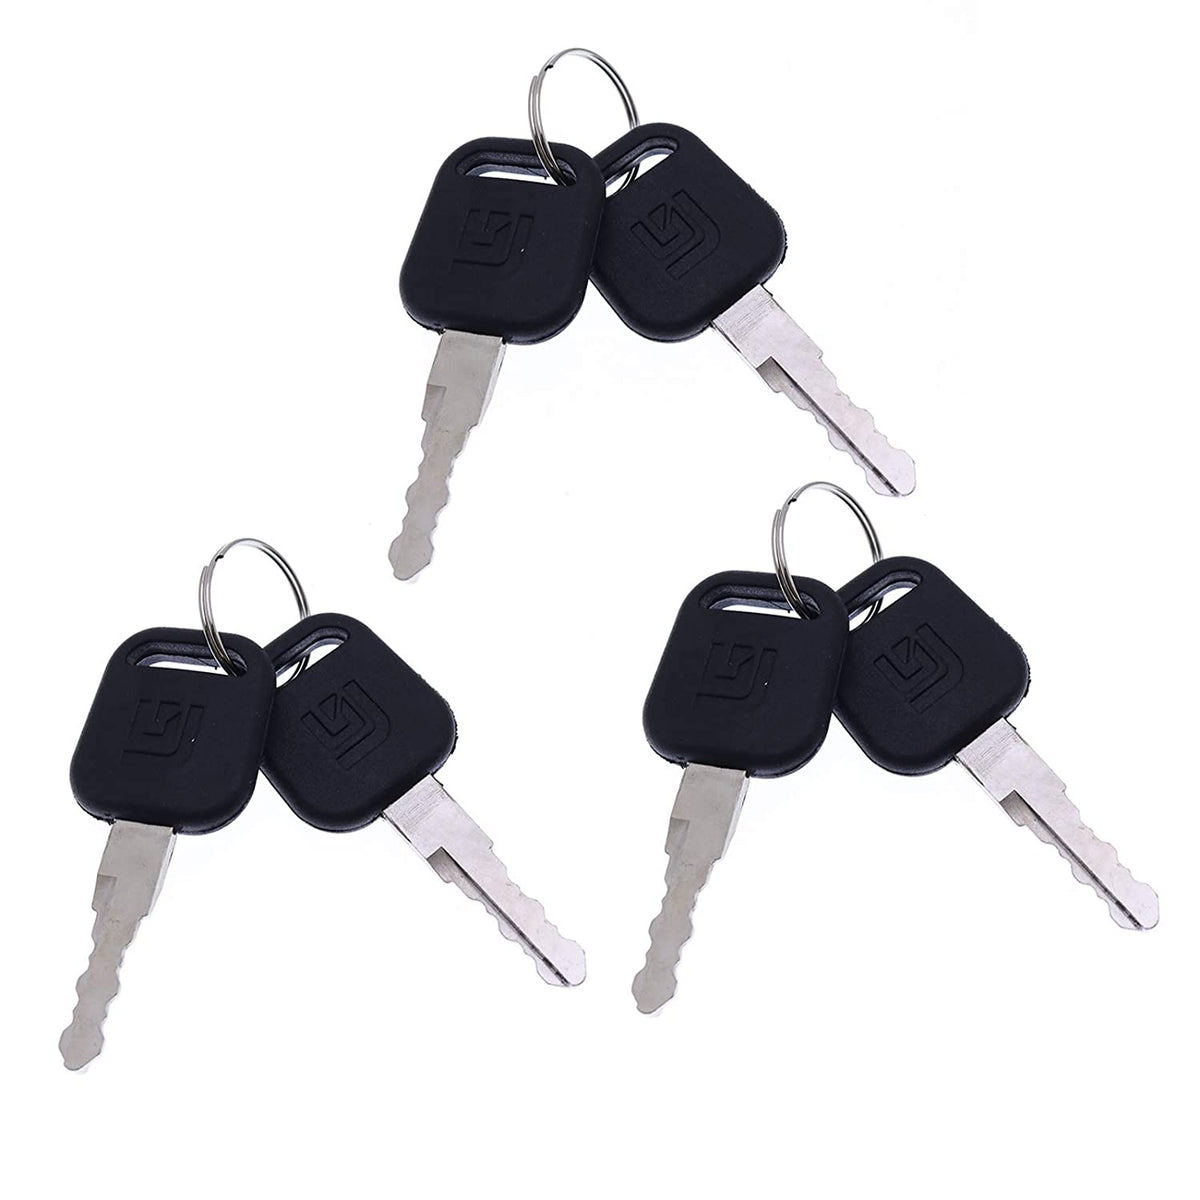 Ignition Keys 34B0557 for Liugong Excavator and Heavy Equipment (6)